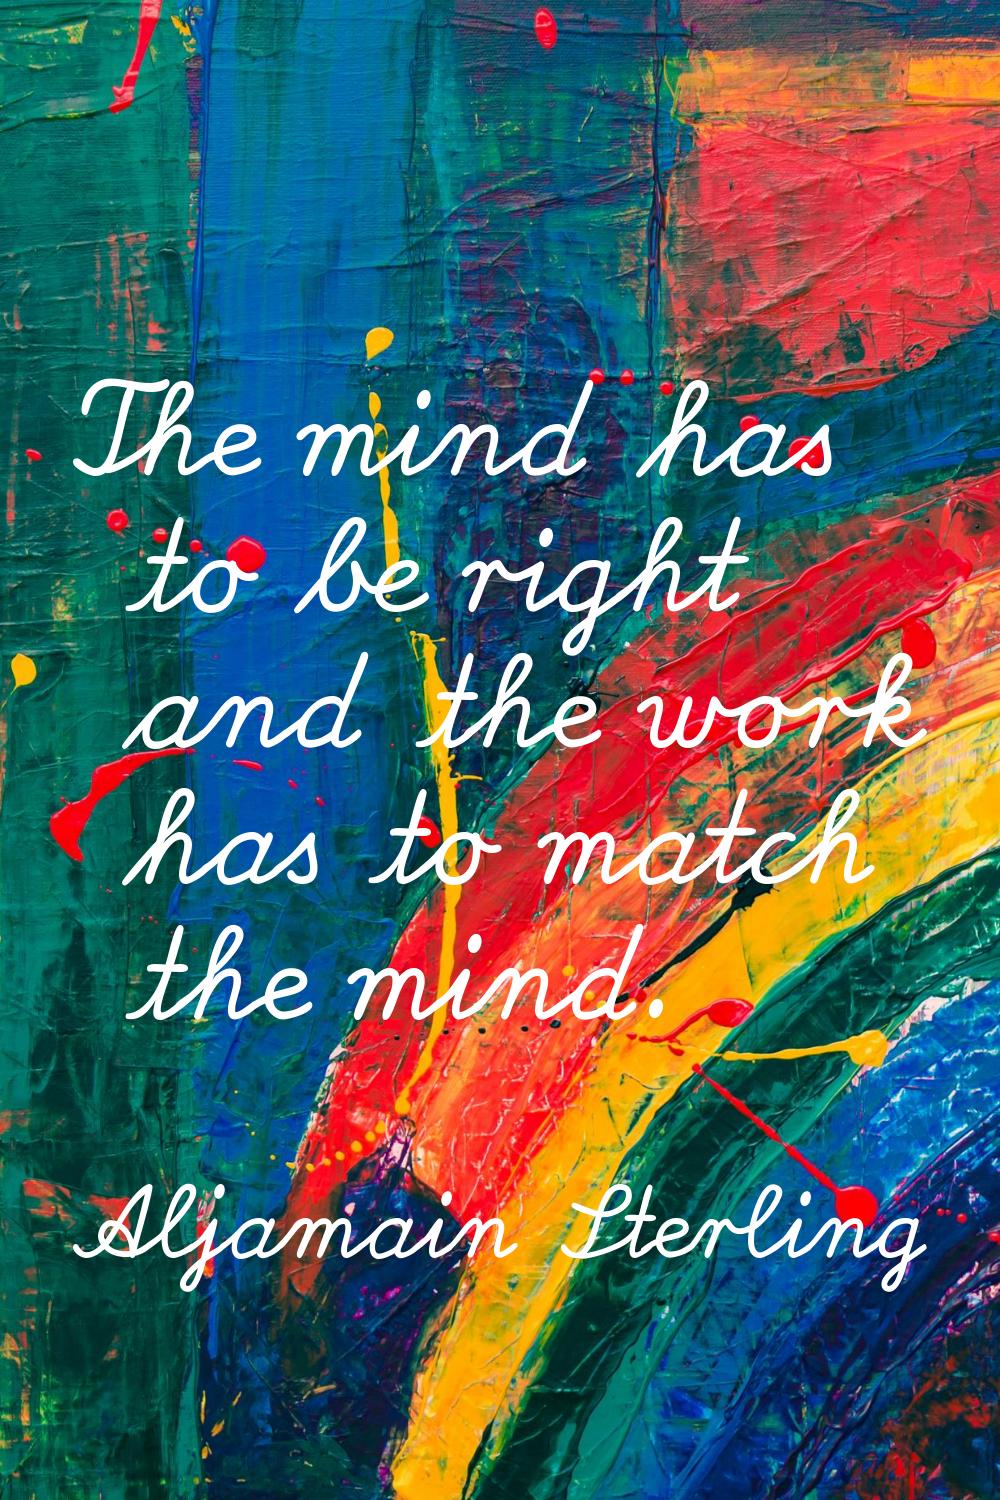 The mind has to be right and the work has to match the mind.